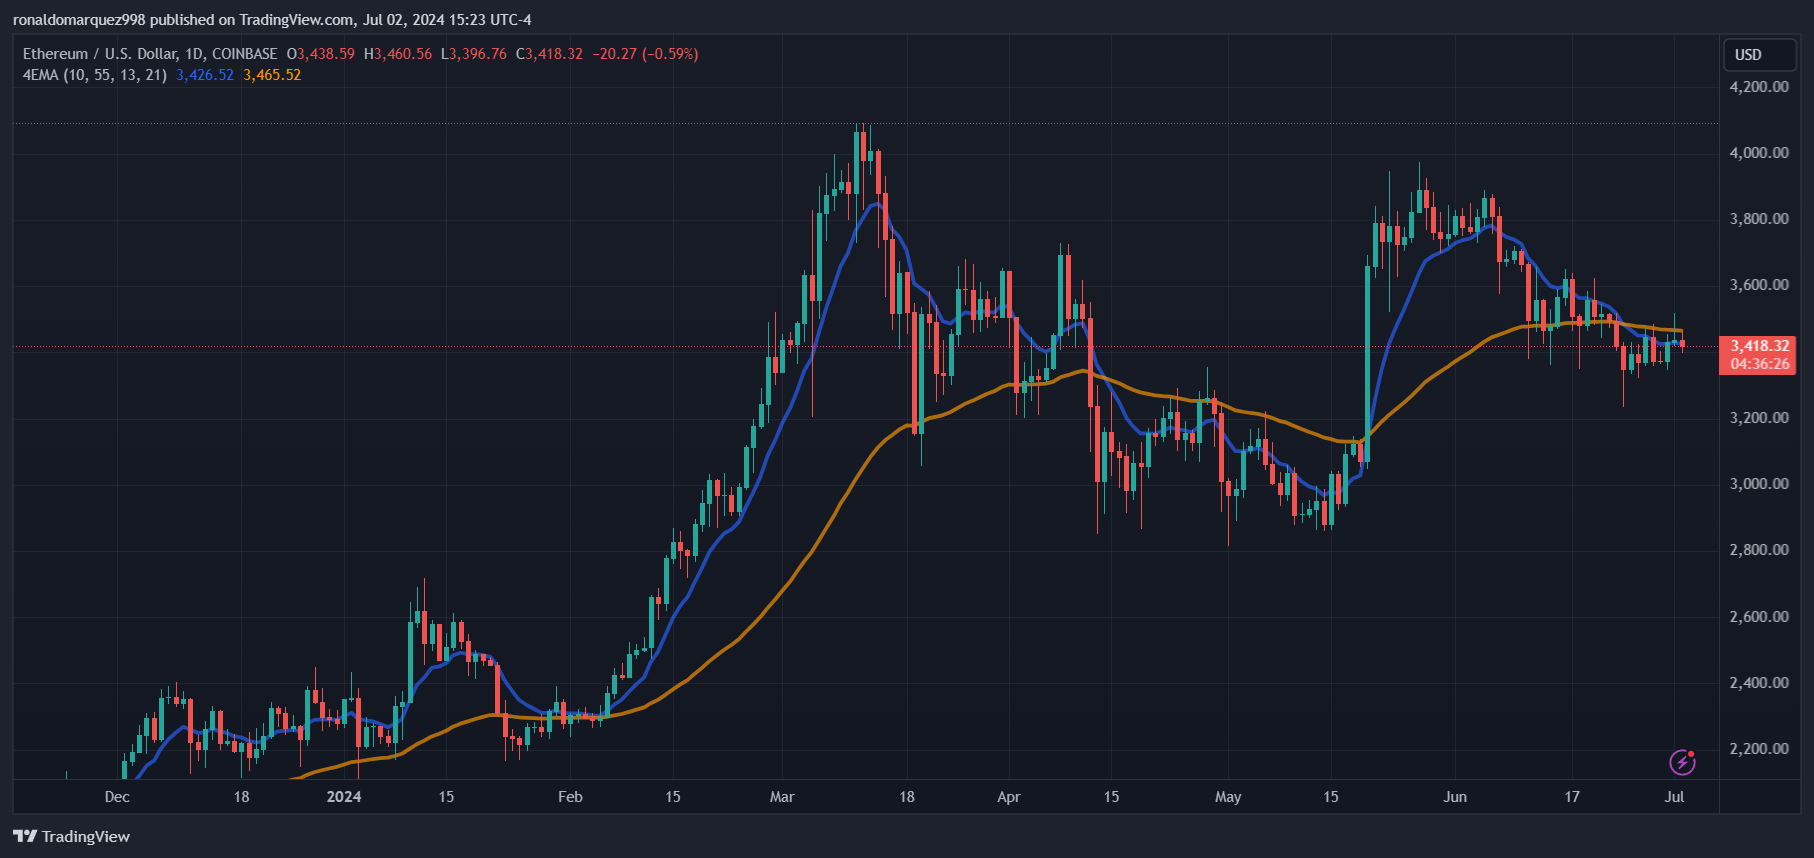 COINBASE:ETHUSD Chart Image by ronaldomarquez998